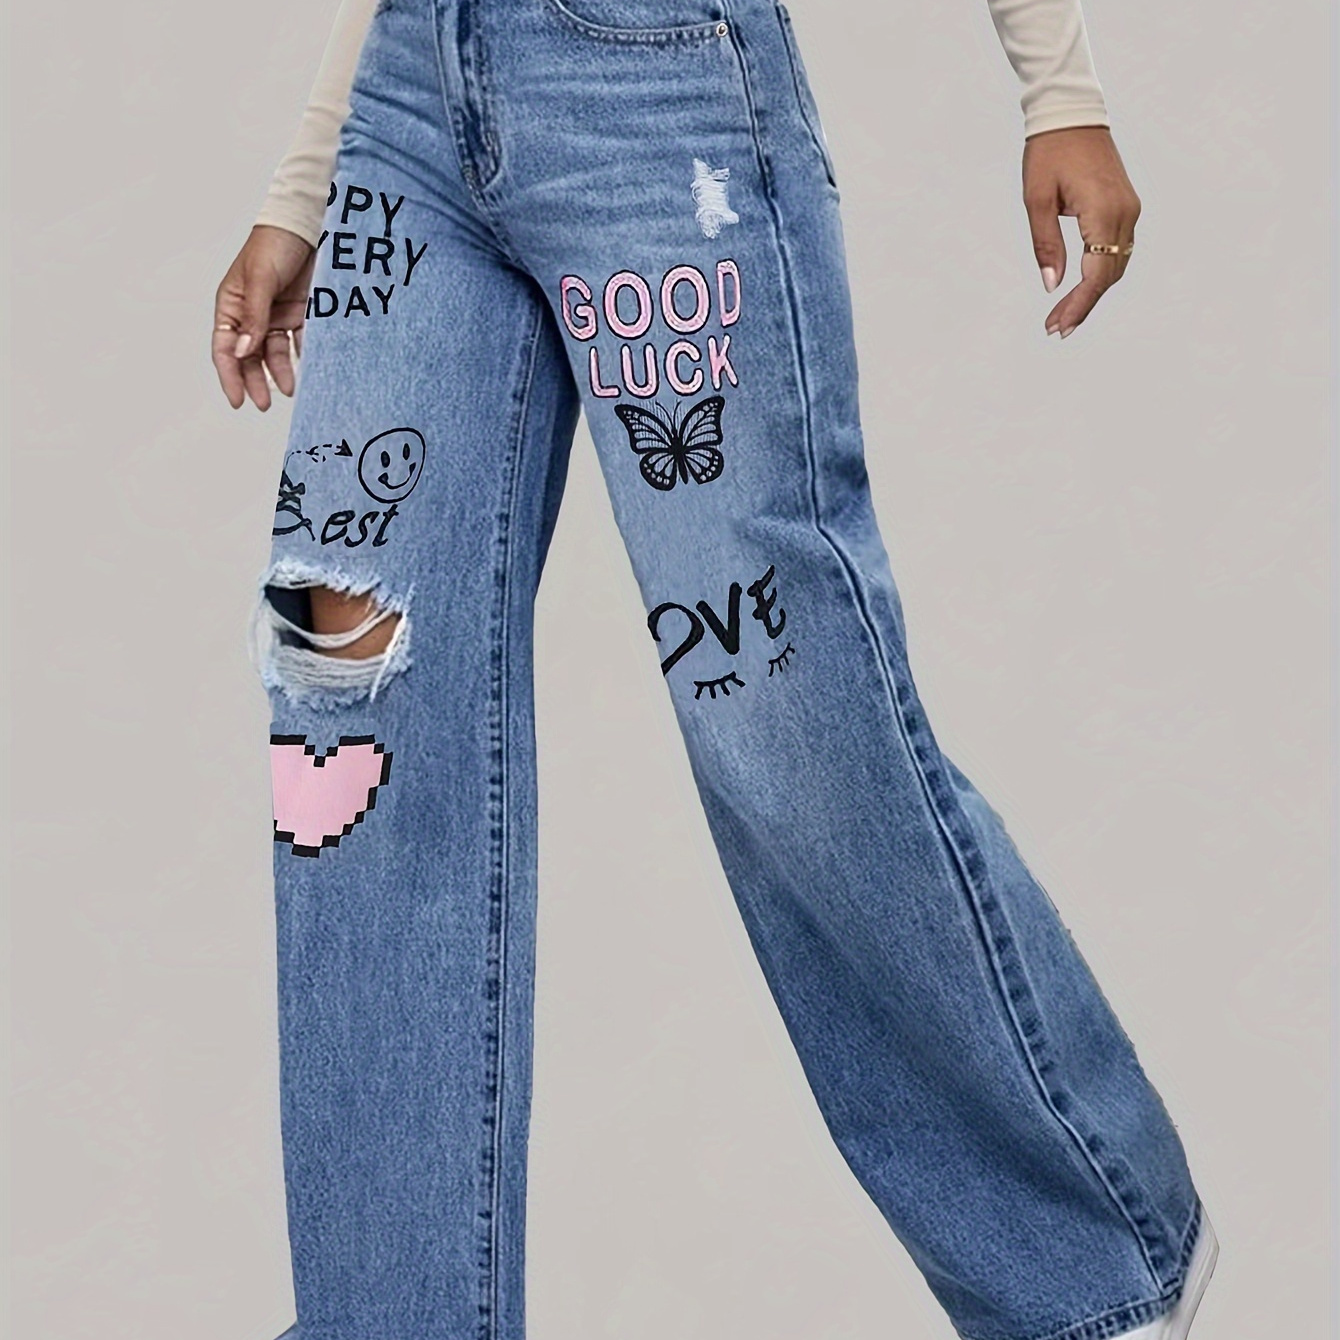 

Women's Casual Printed Jeans, Wide-leg Denim Pants With Ripped Details And Positive Messages Print, Fashionable Streetwear